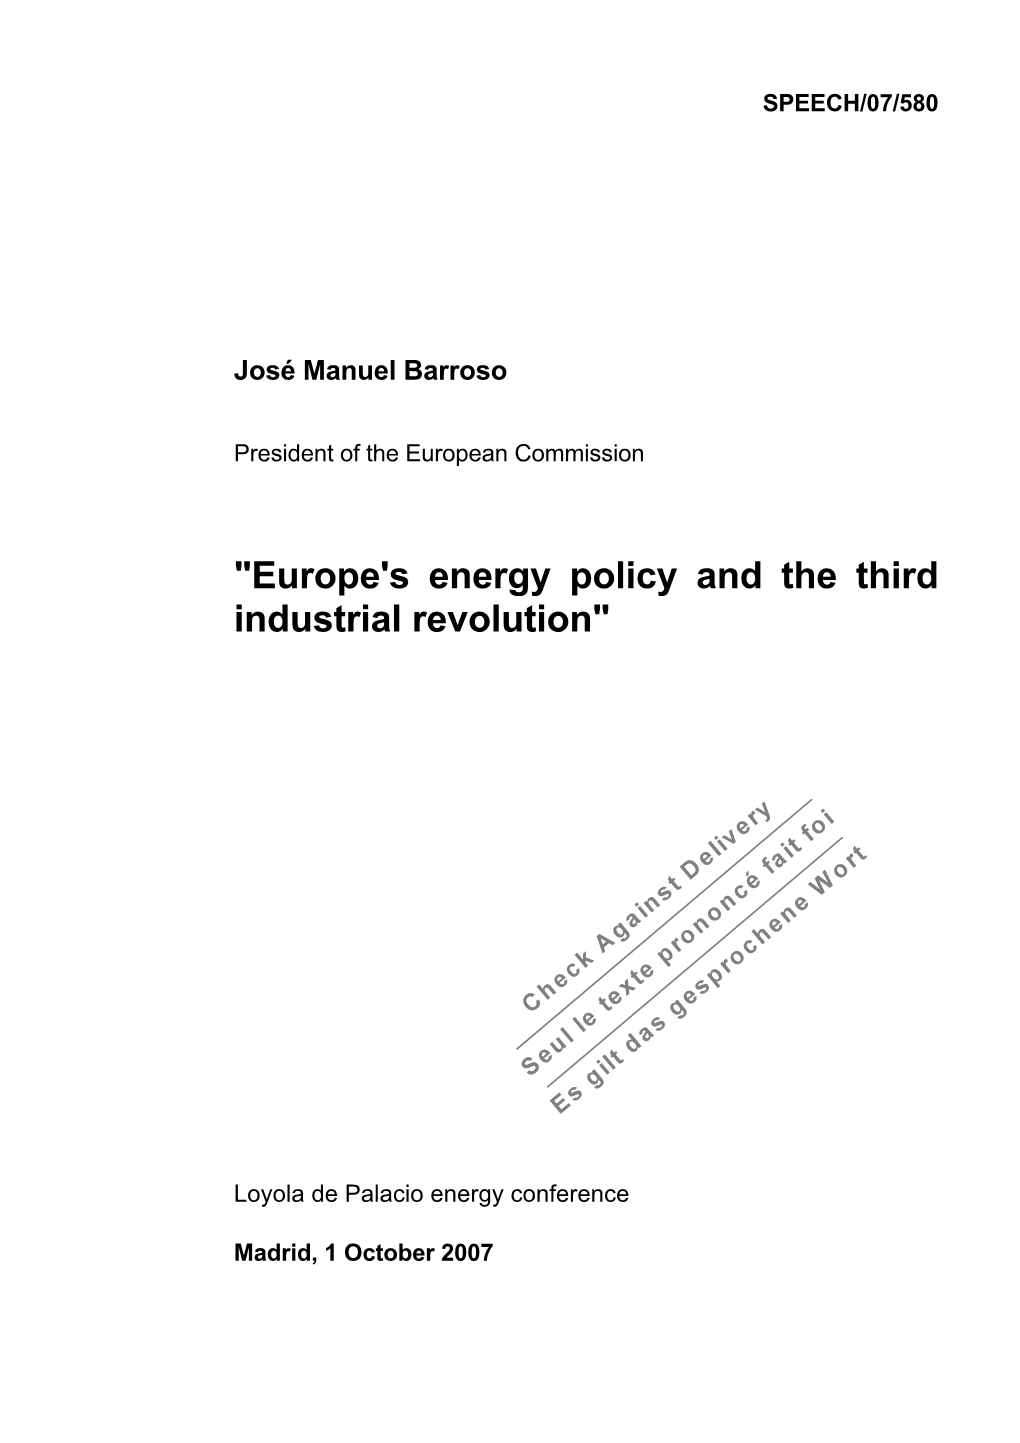 "Europe's Energy Policy and the Third Industrial Revolution"